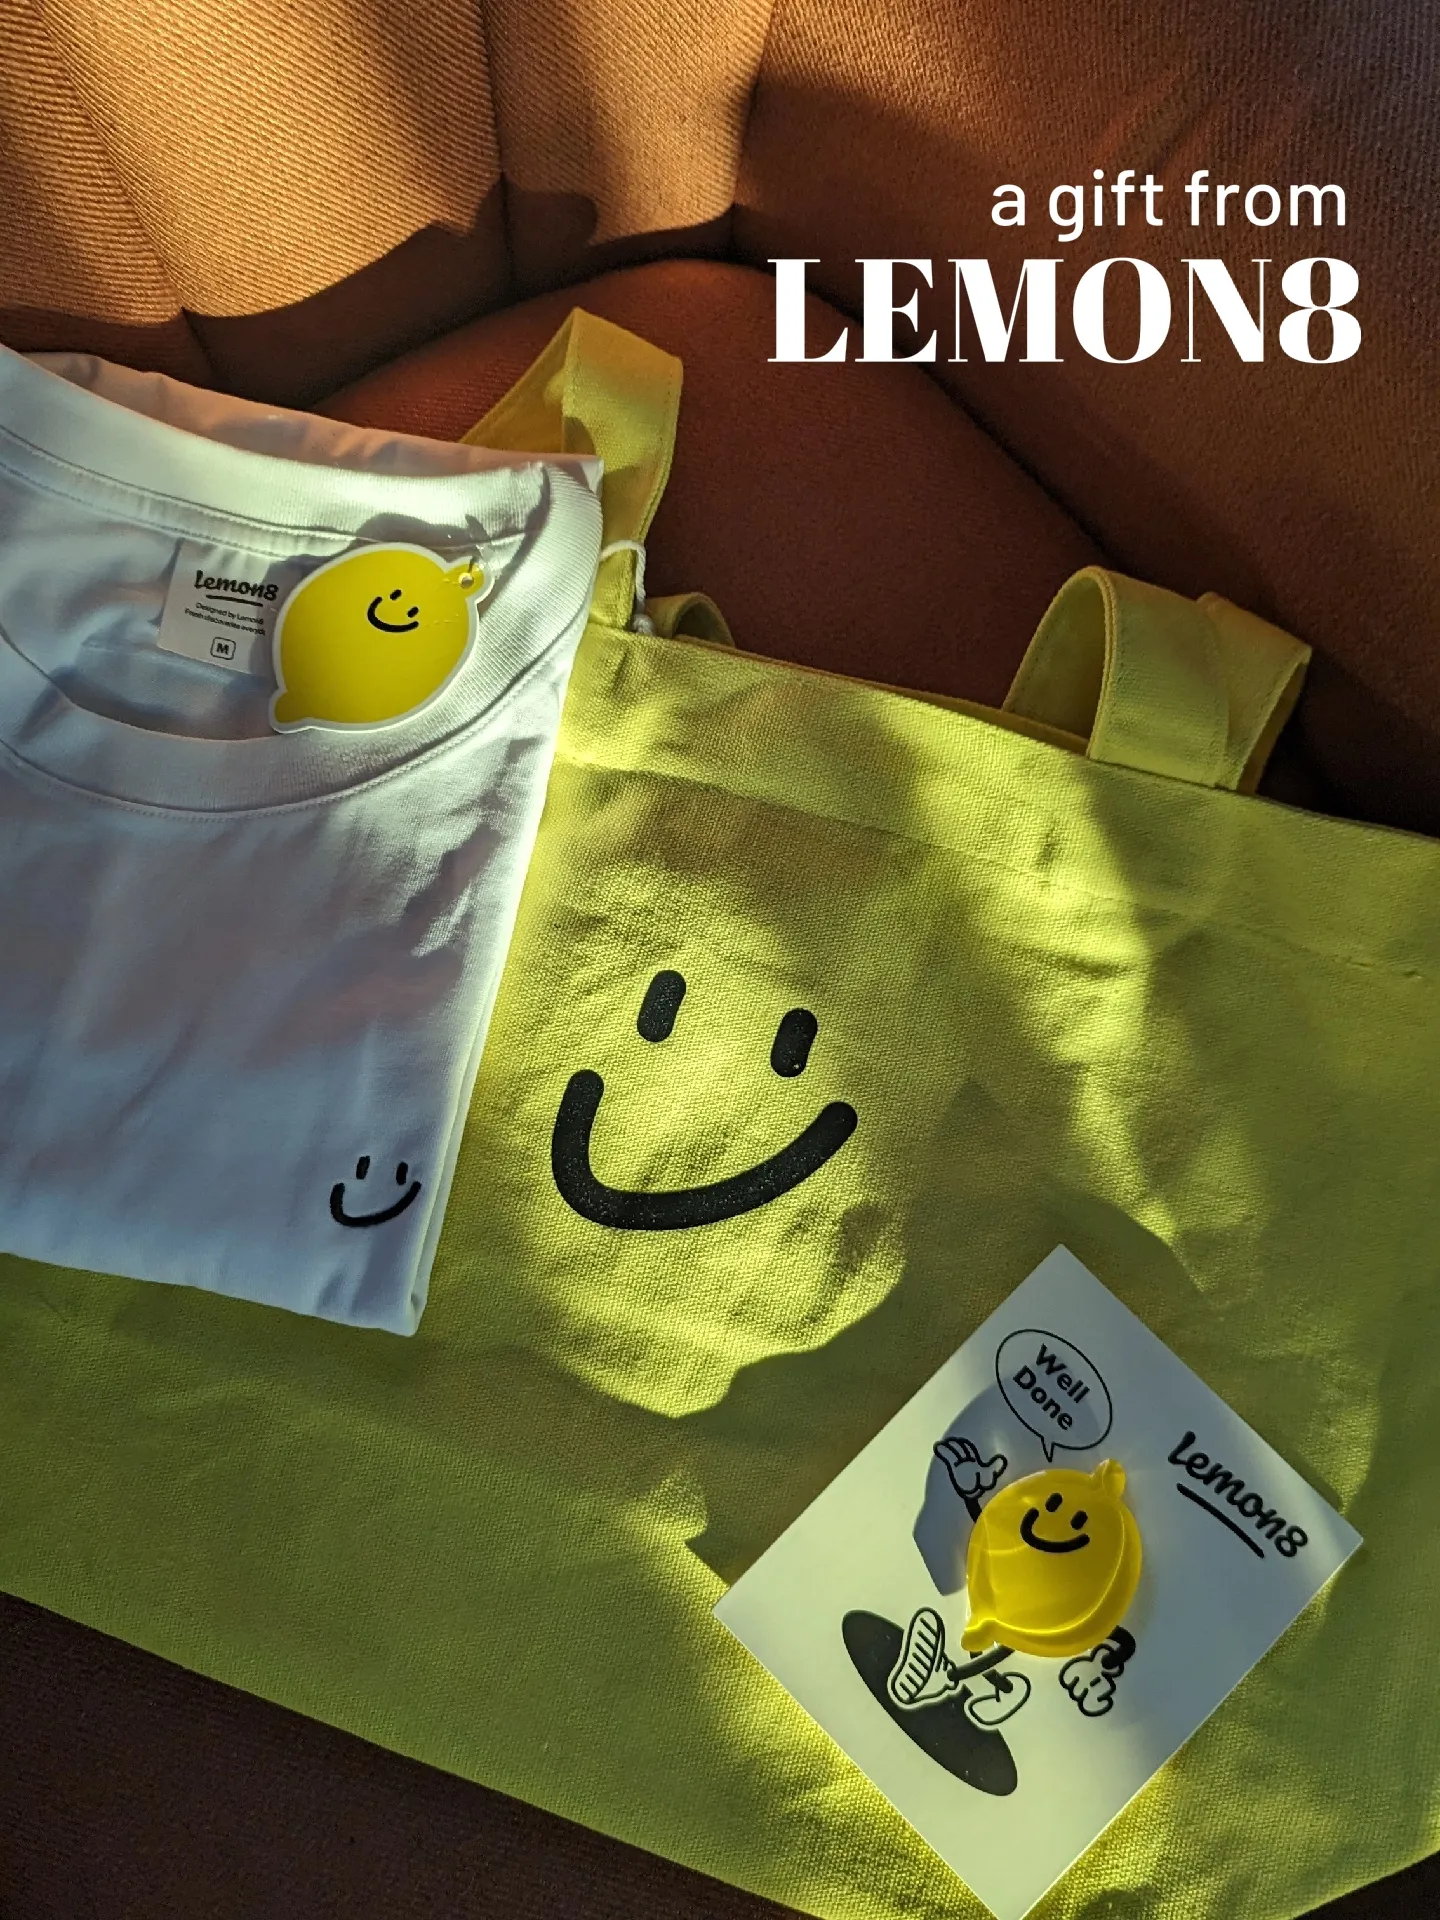 when the Lemon8 team sends you a package (!!)'s images